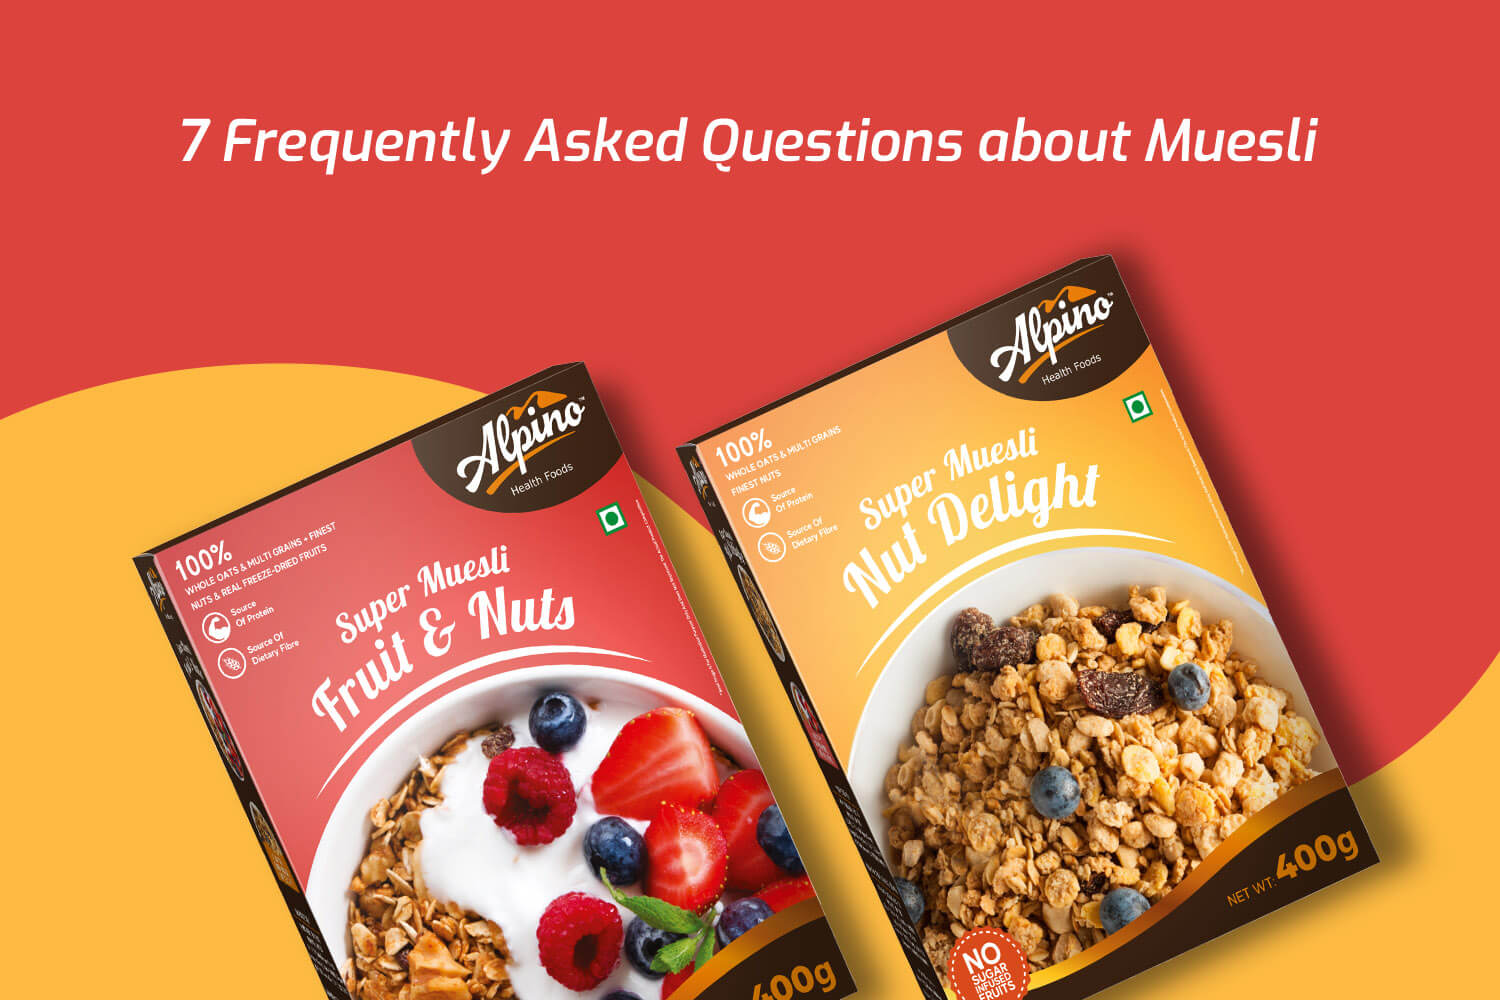 7 Frequently Asked Questions about Muesli